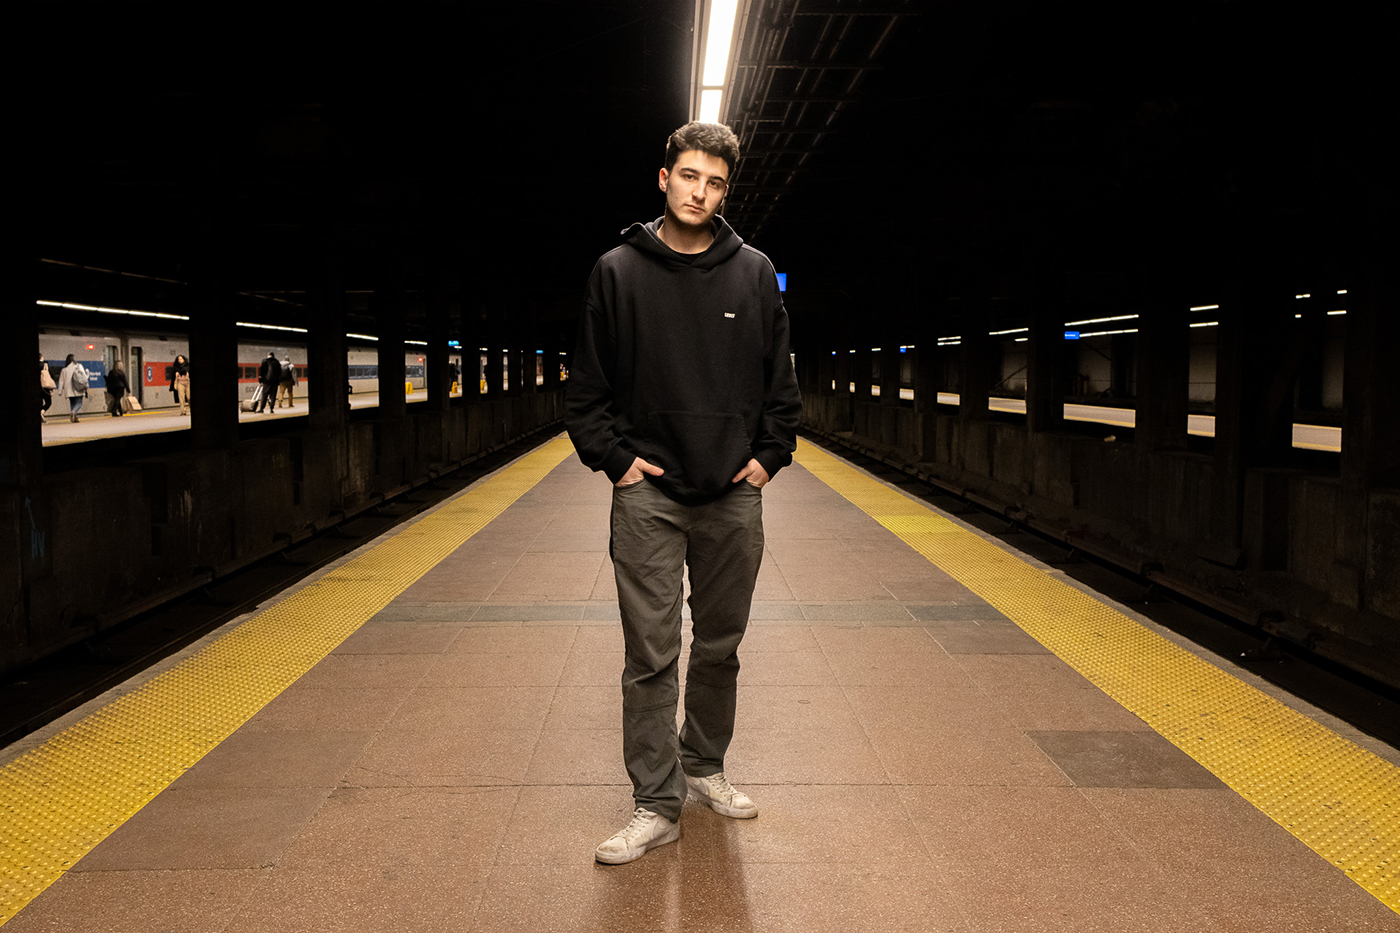 Jonathan Klopp posing for photo in a subway station